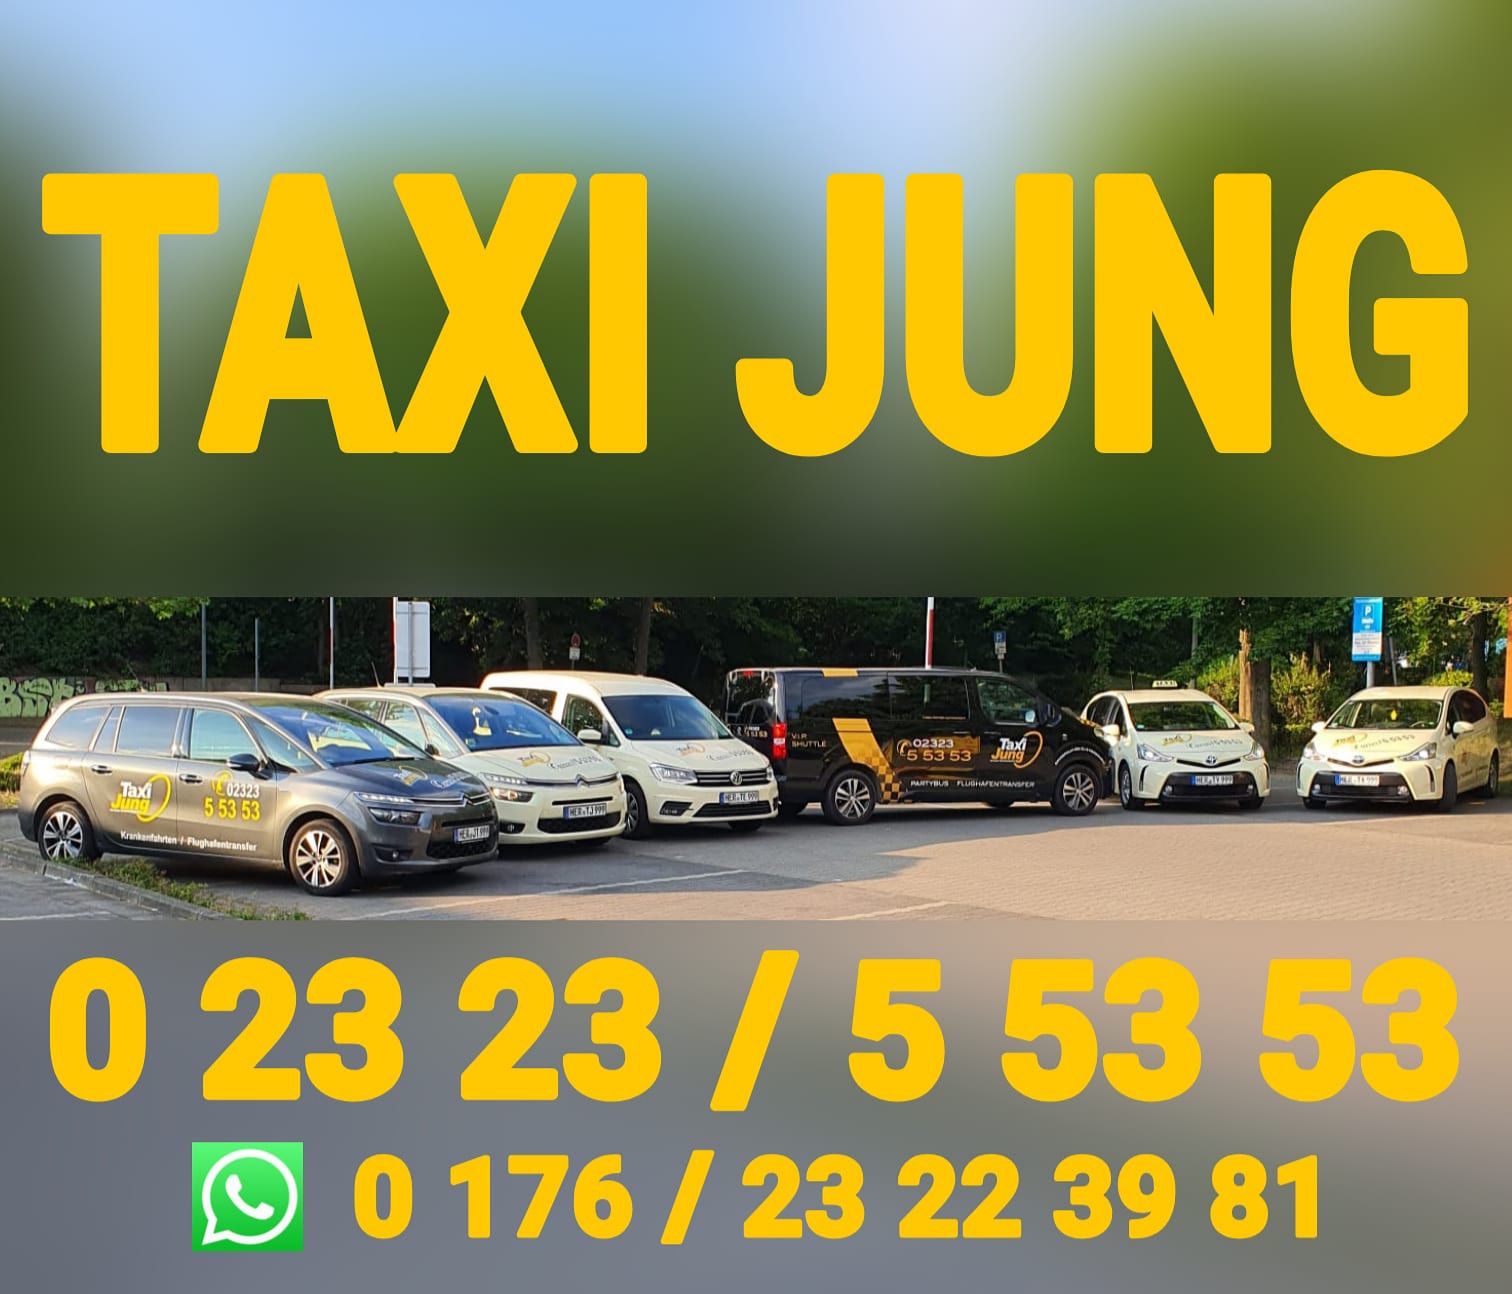 Taxi Herne